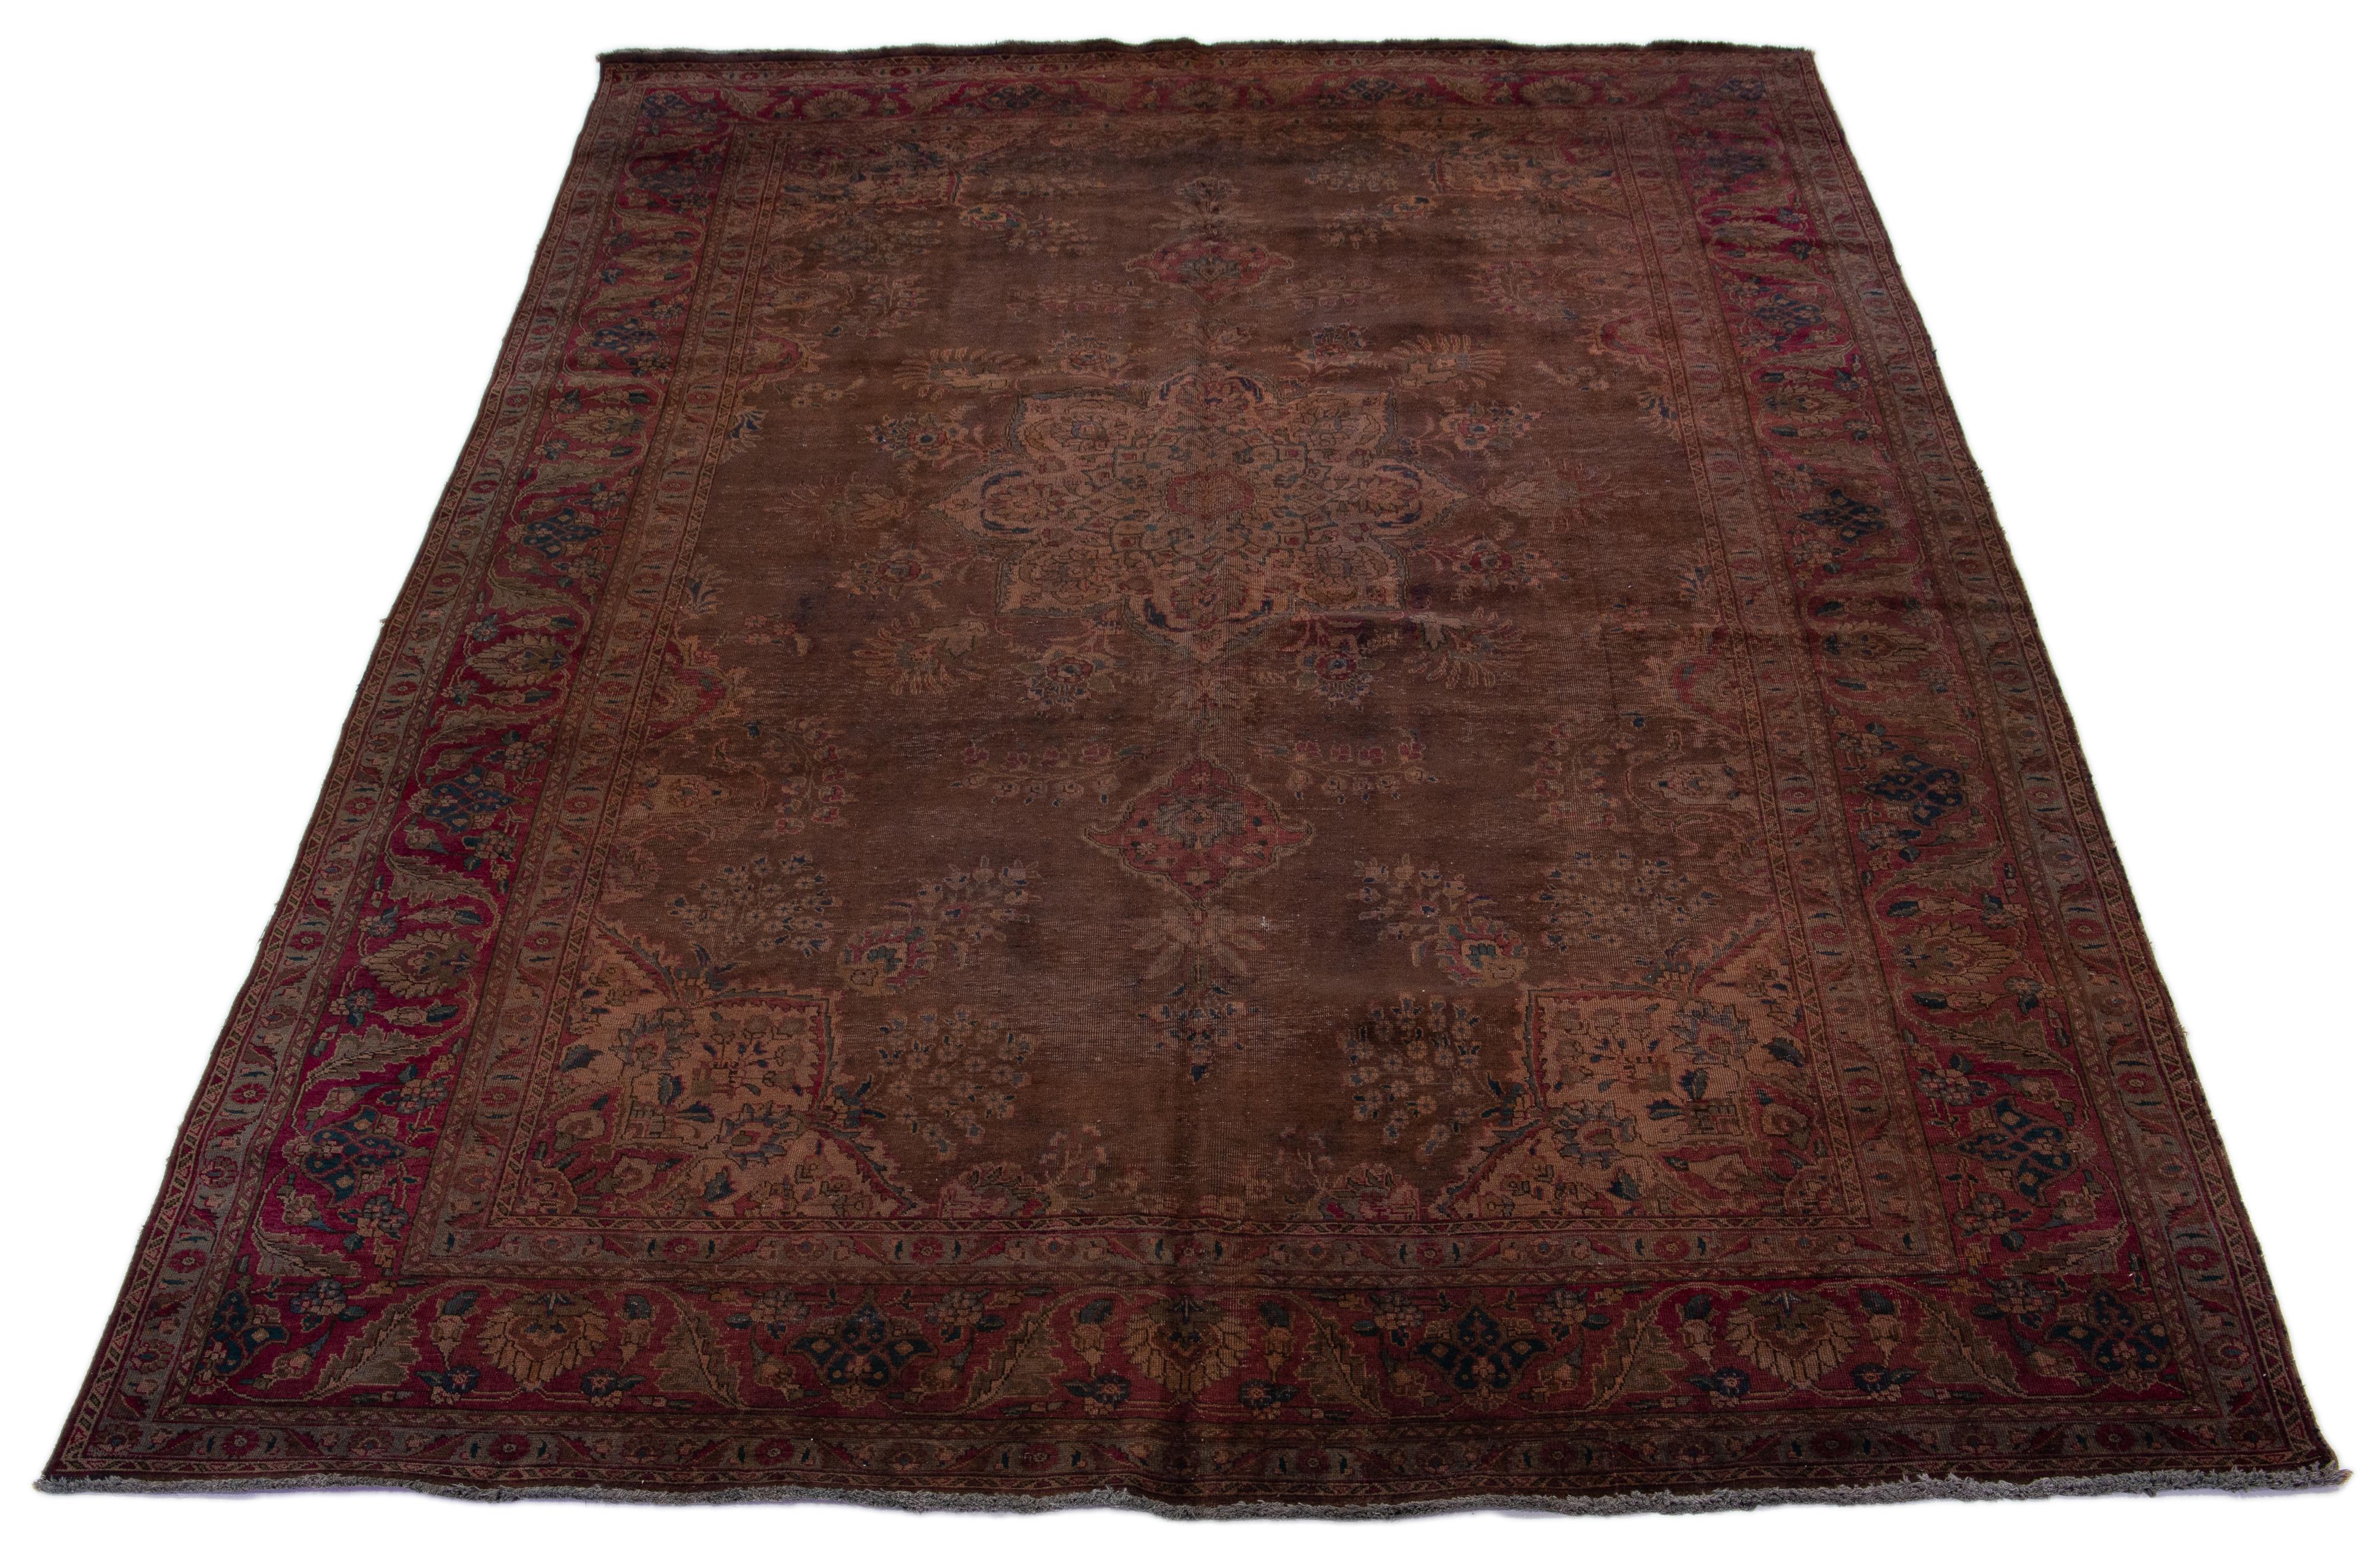 This Persian carpet from the 1950s features a medallion design in the center and has been distressed and overdyed for a vintage look. Its rich brown hue lends a luxurious elegance to any room.

This rug measures 9'10